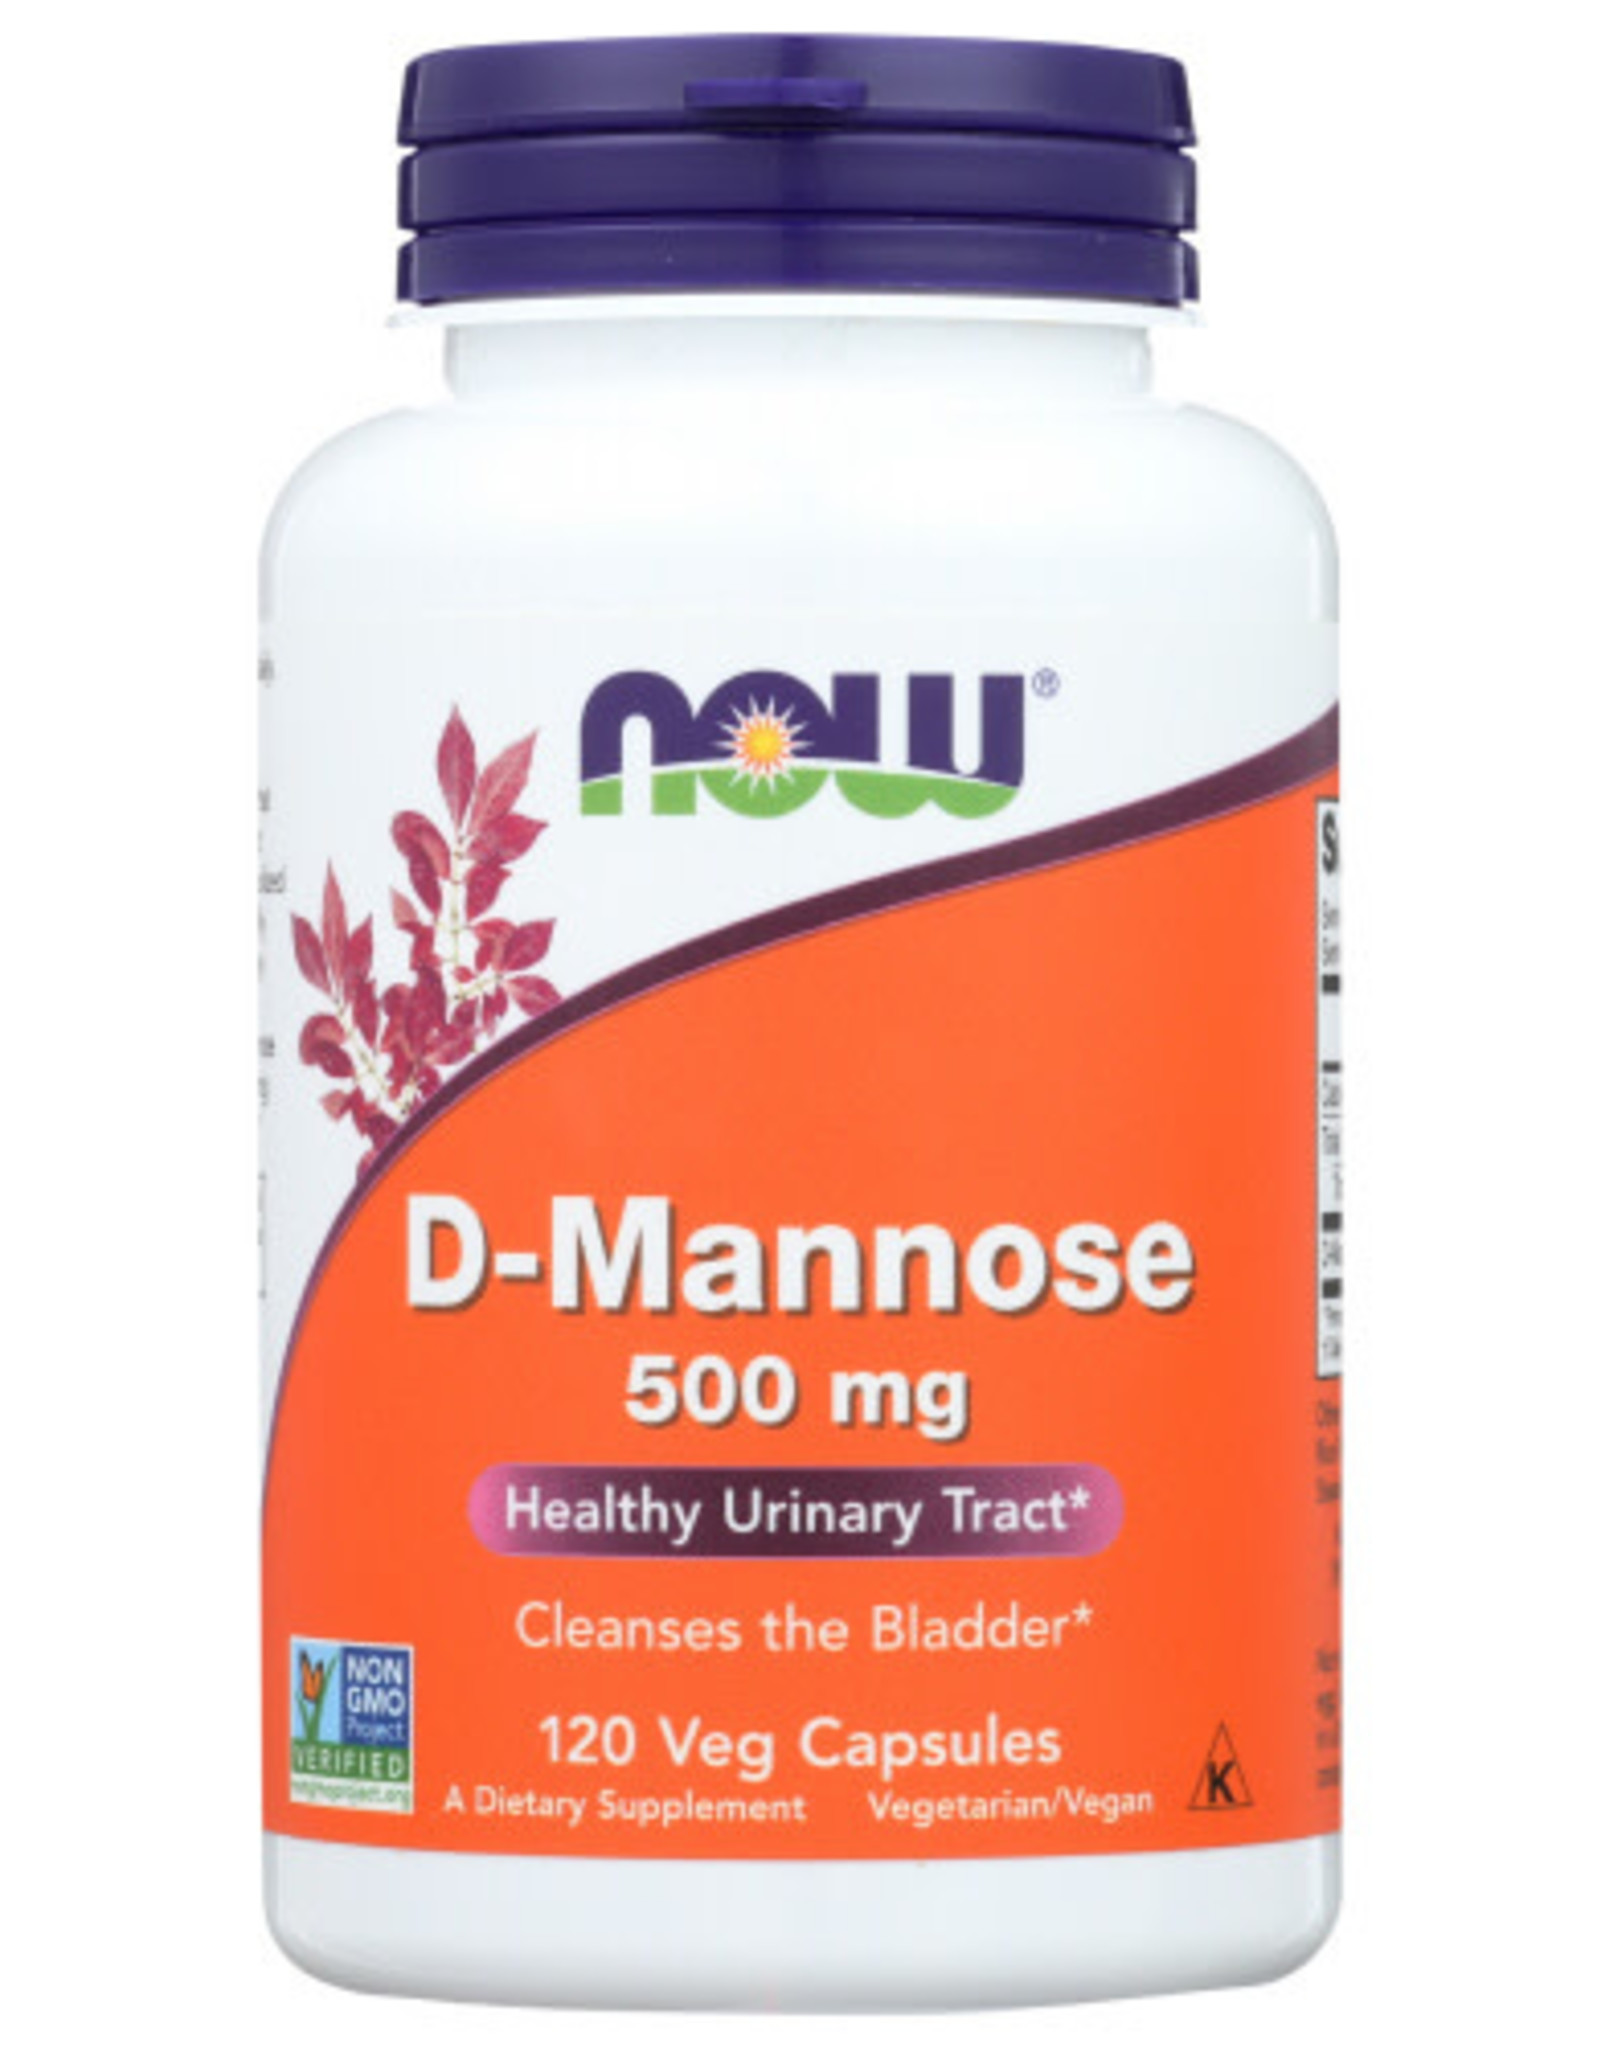 NOW® NOW D-MANNOSE POWDER 500 MG, 120 CAPS.